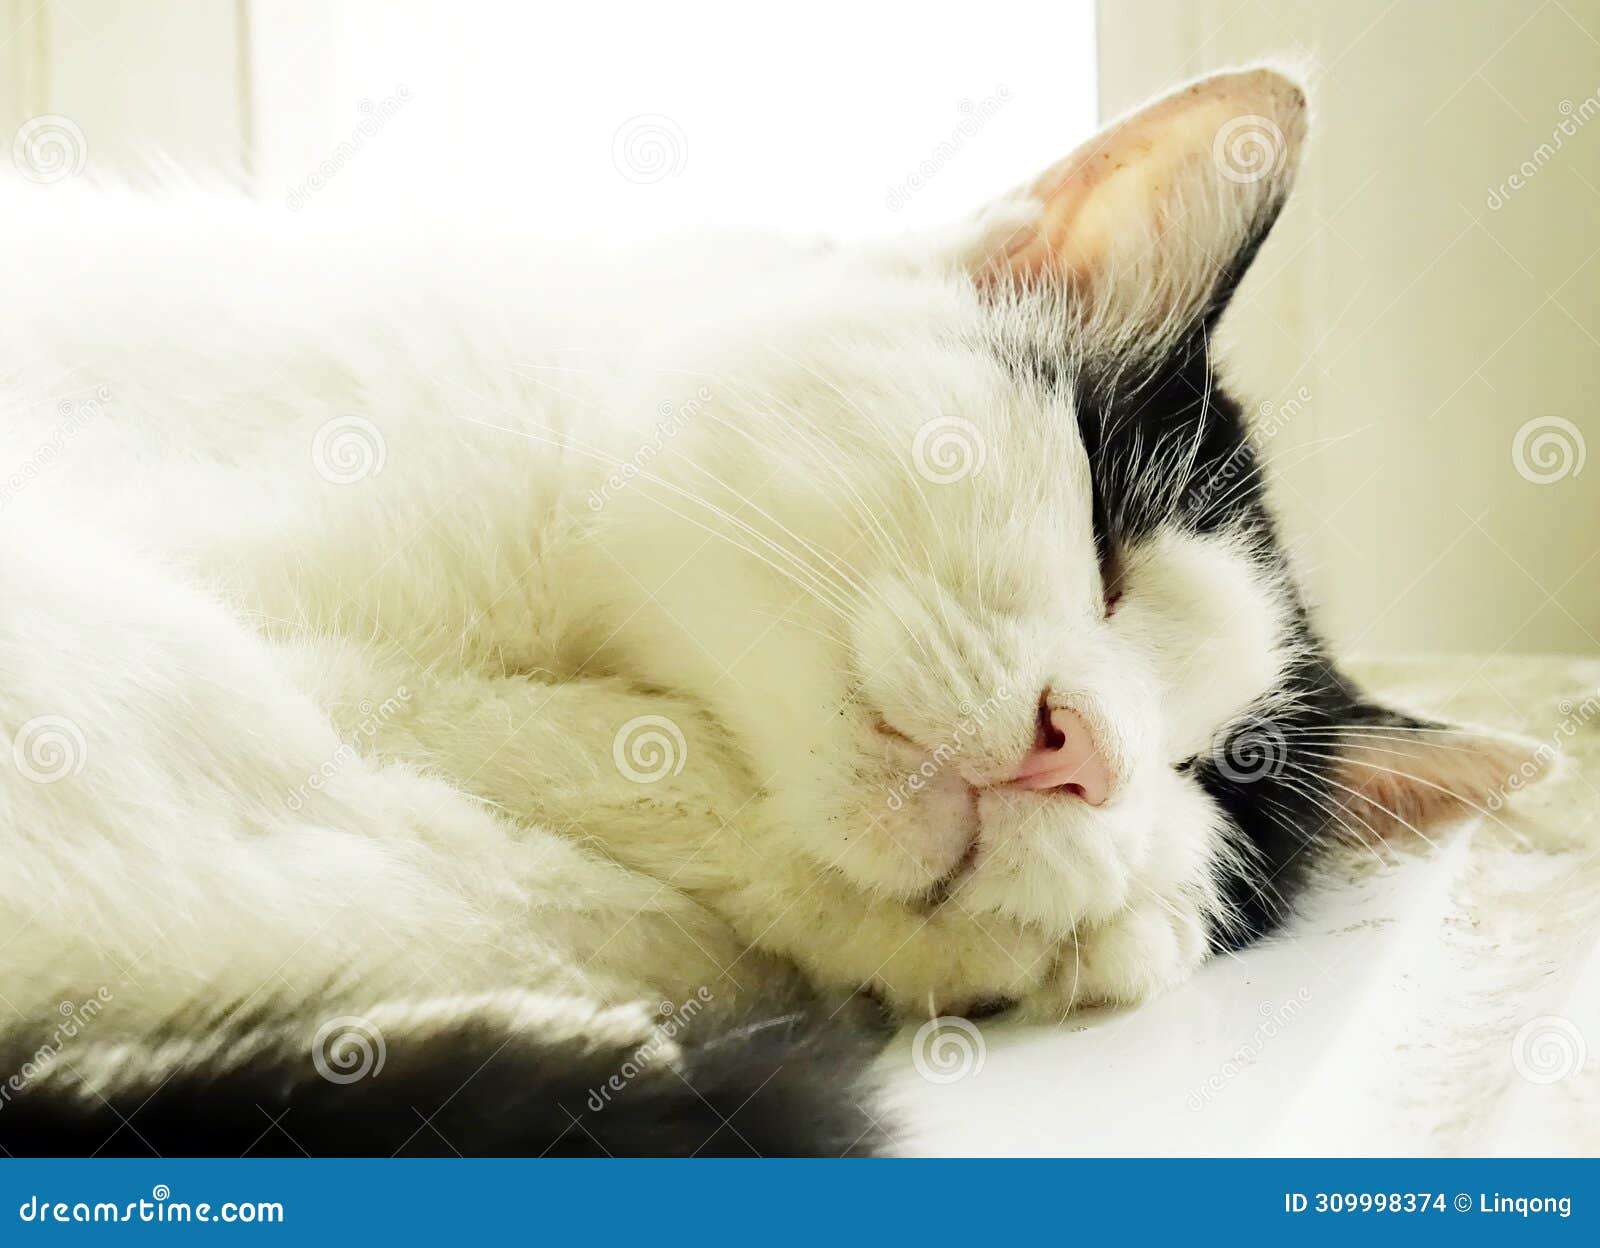 cute cat is sleeping soundly.